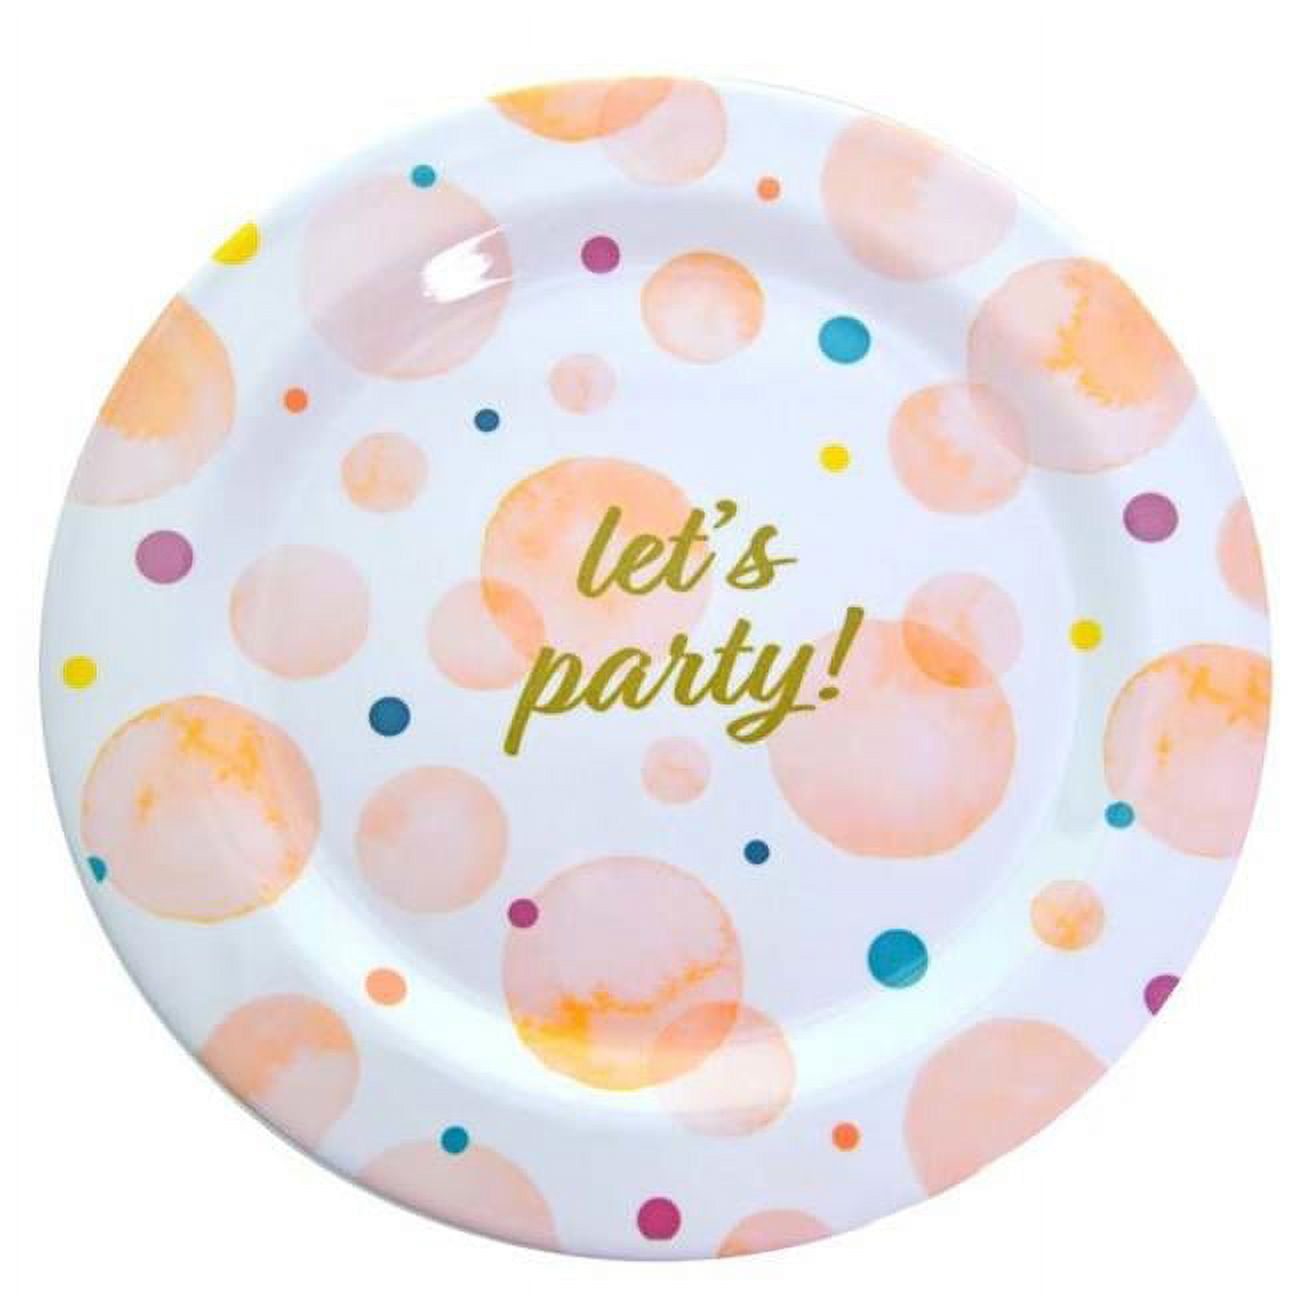 Picture of DDI 2362974 10.75 in. Lets Party Melamine Dinner Plates - Case of 96